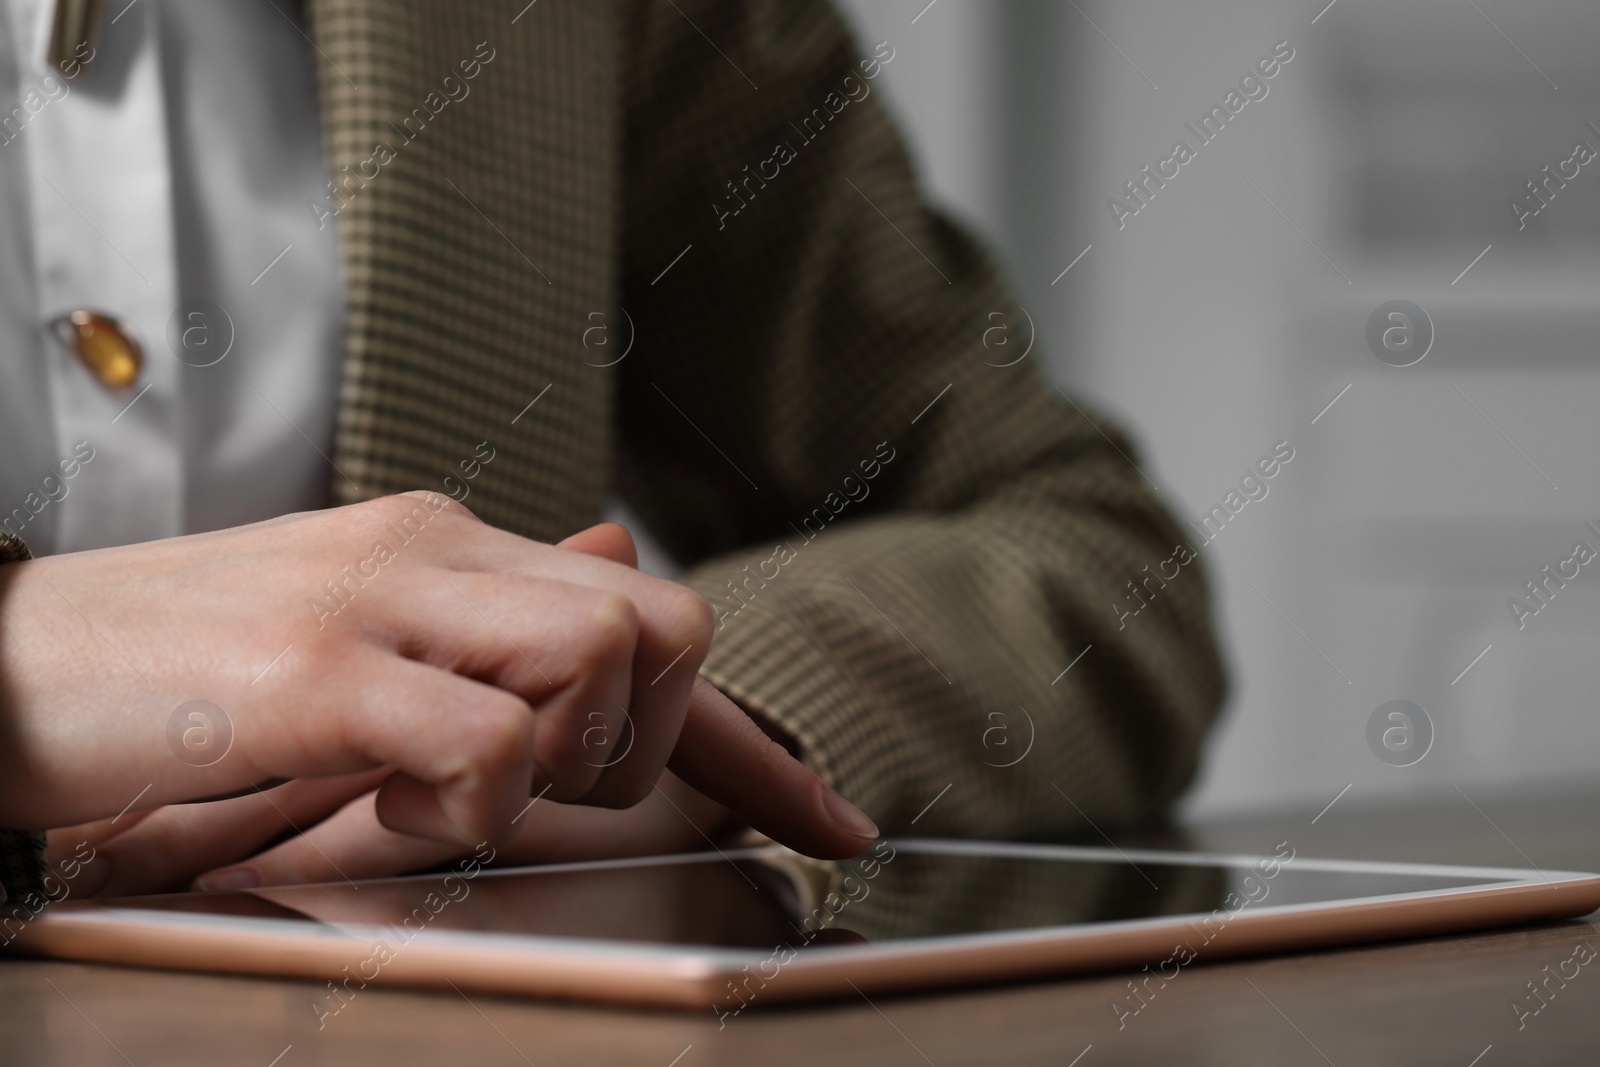 Photo of Closeup view of woman using modern tablet at table on blurred background